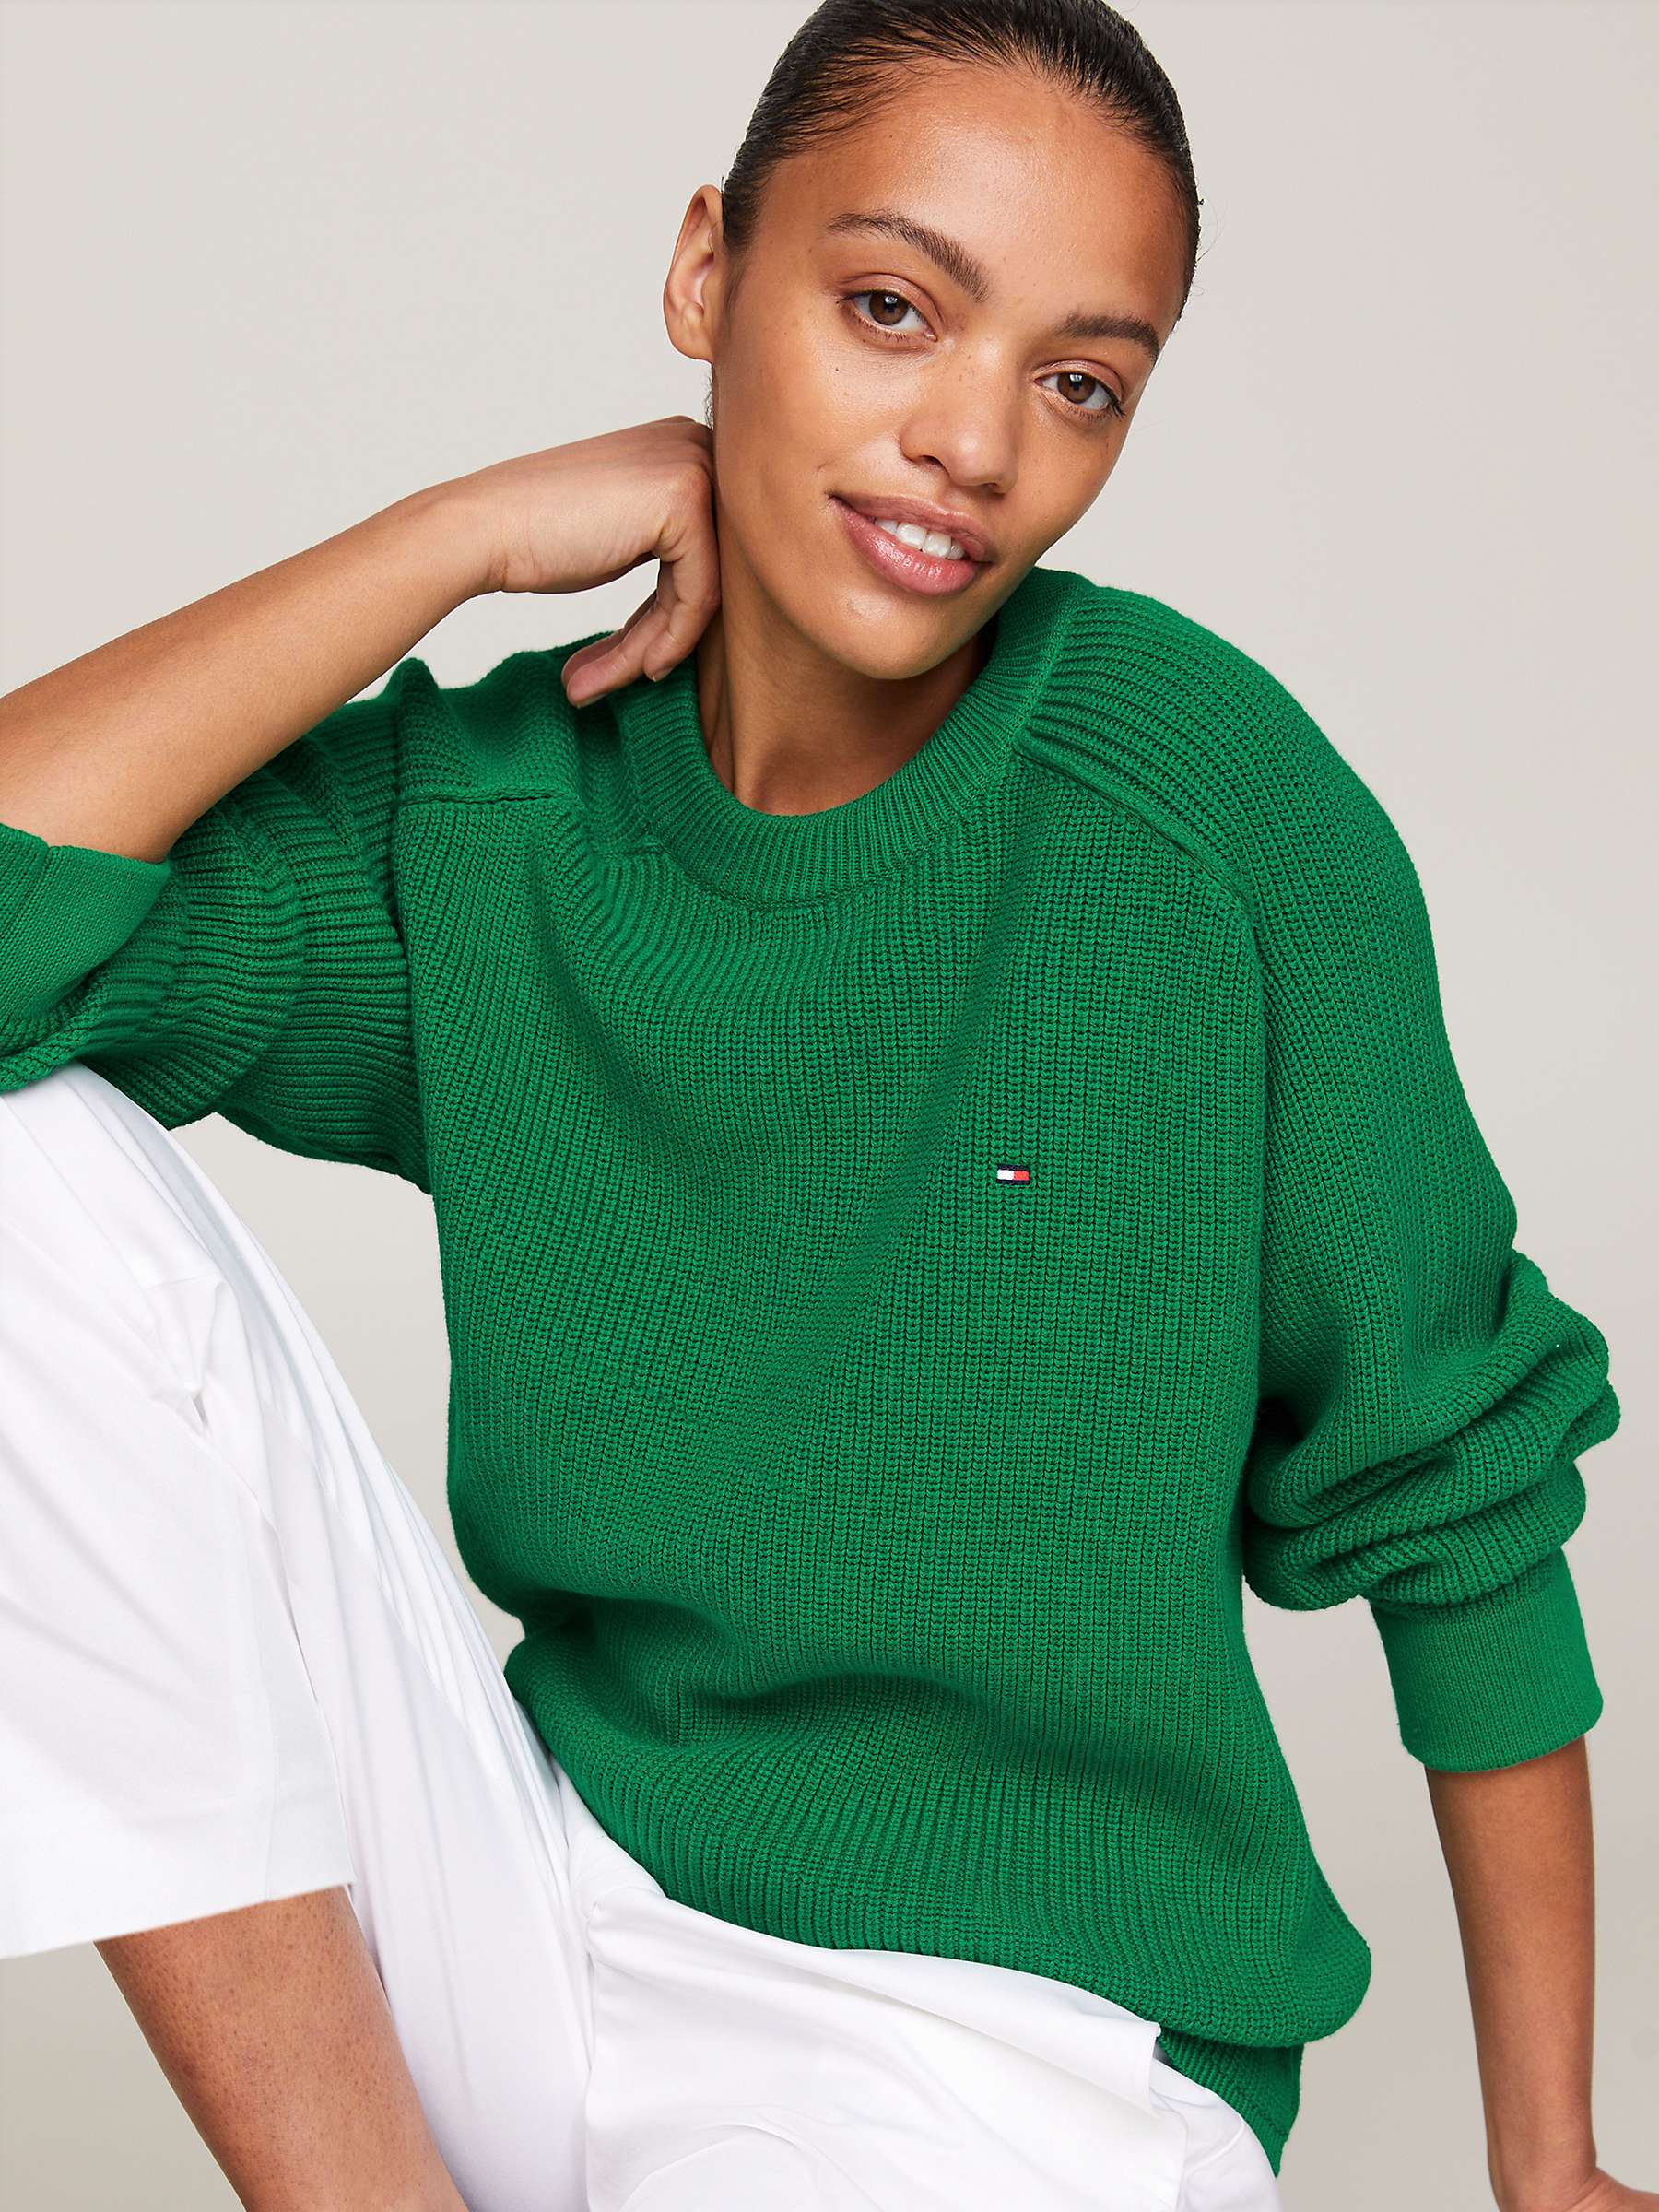 Buy Tommy Hilfiger Rib Knit Crew Neck Jumper, Olympic Green Online at johnlewis.com